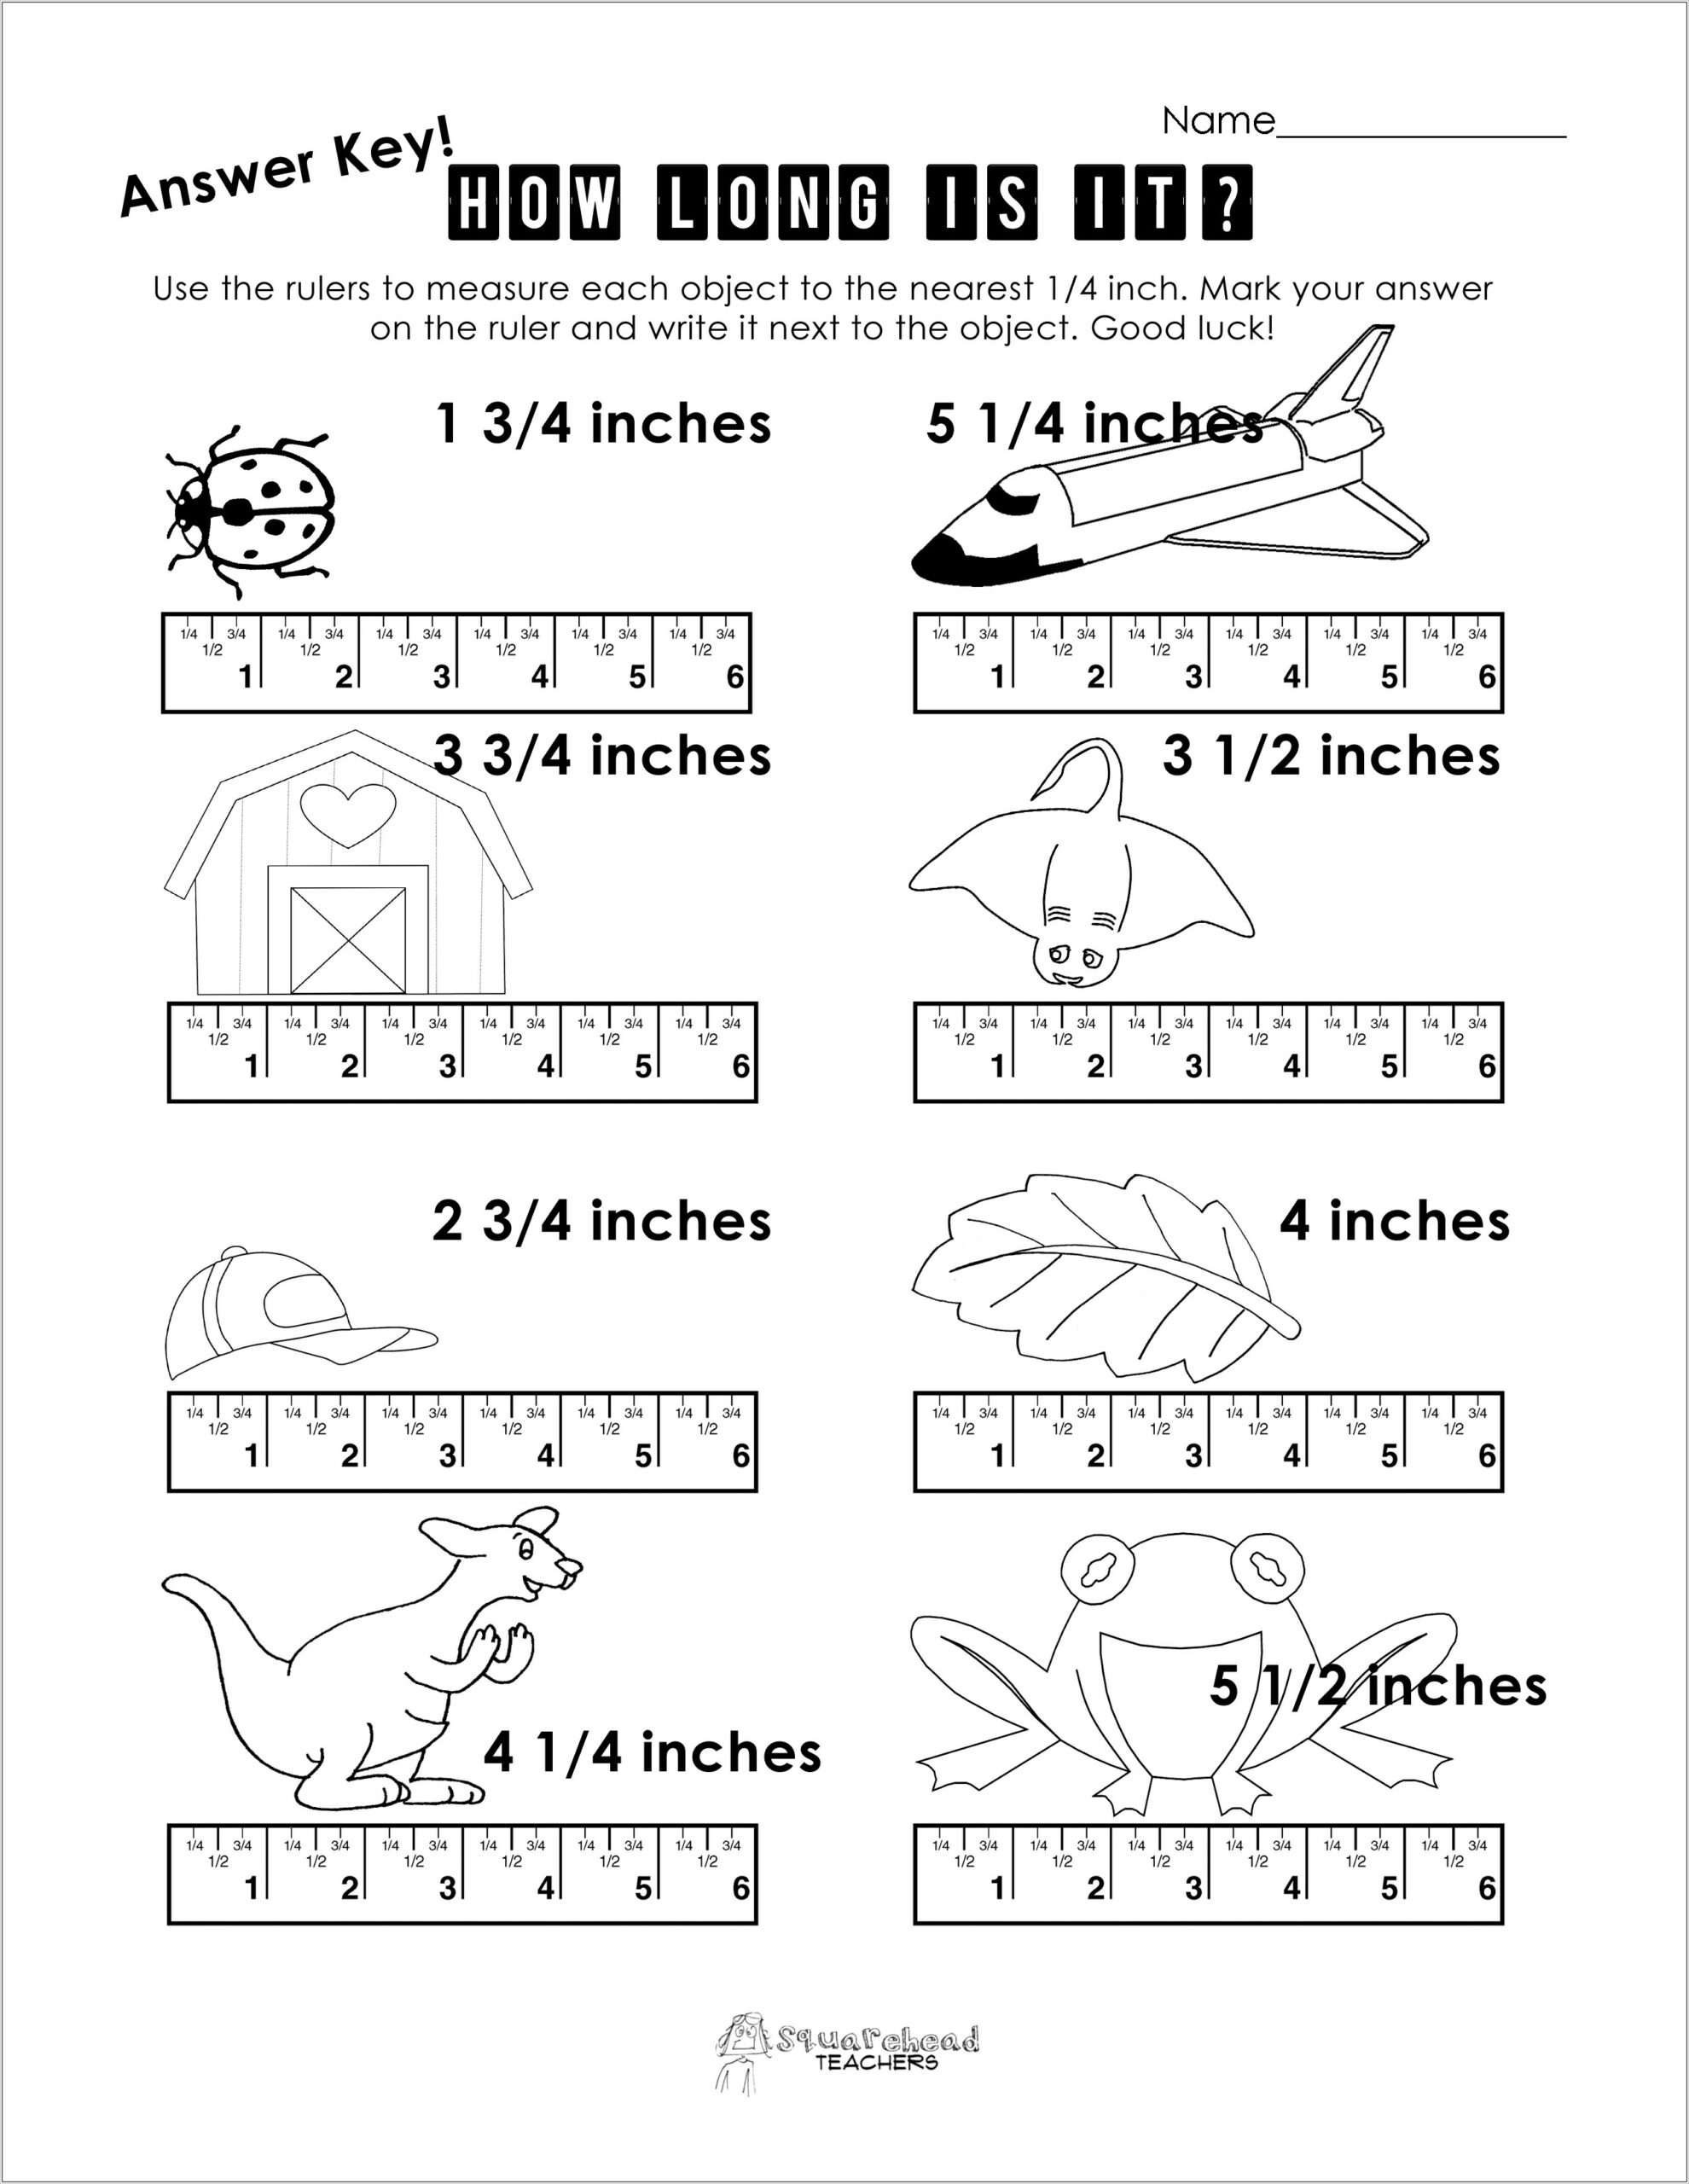 Reading A Standard Ruler Worksheet Answers